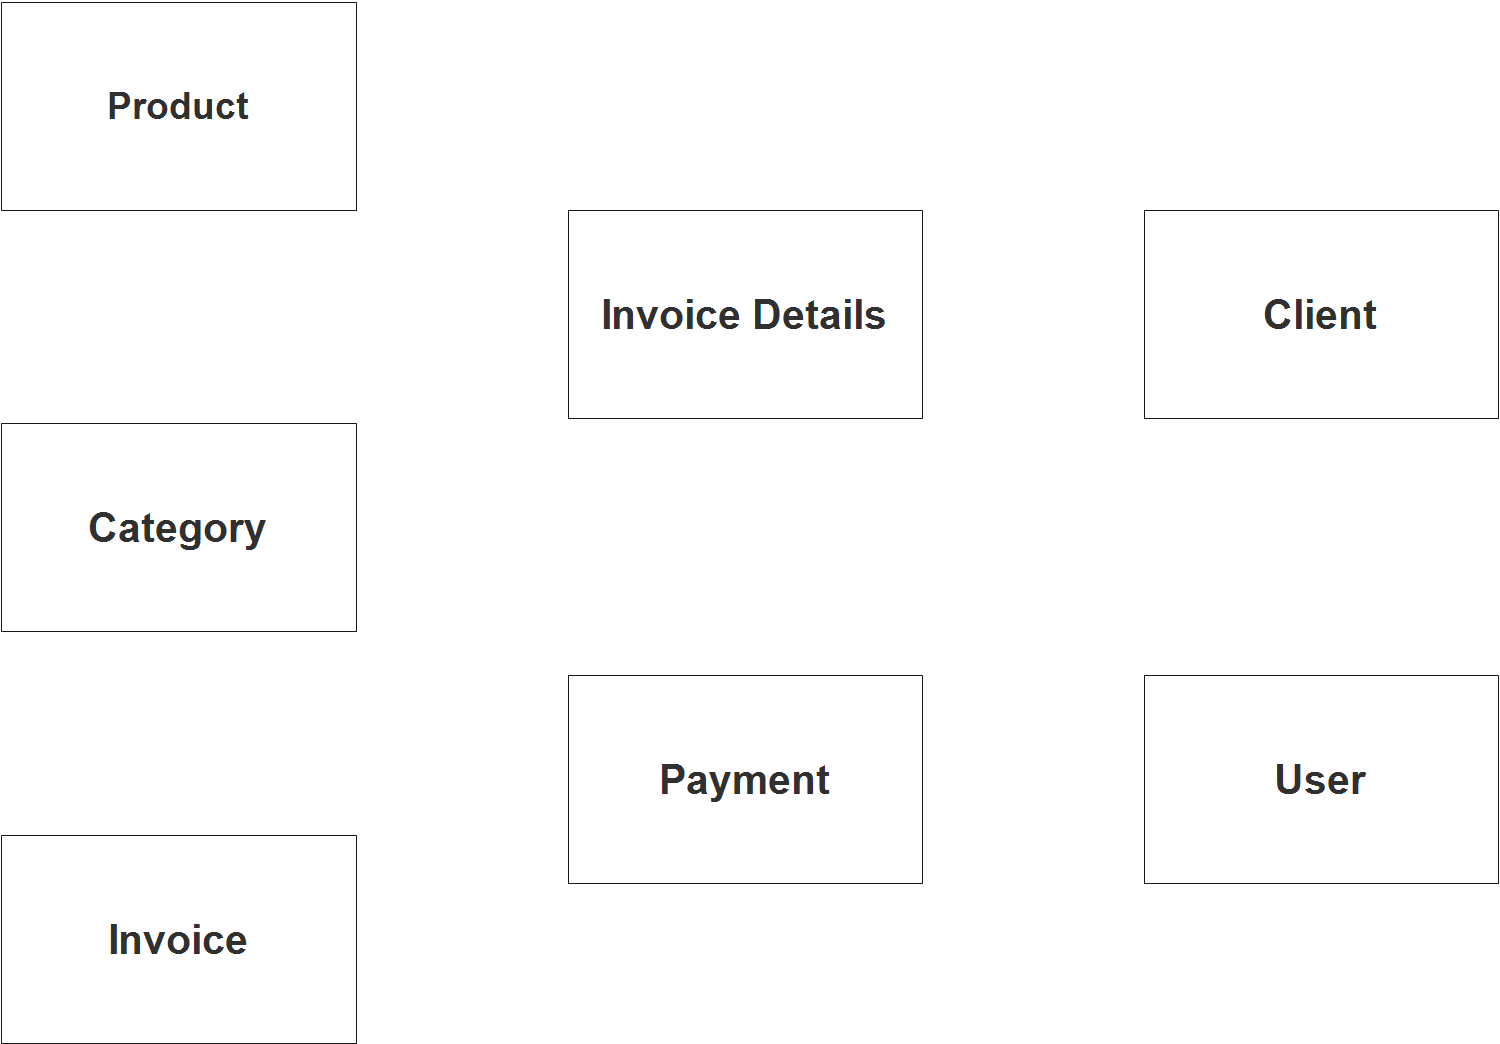 Invoice Management System ER Diagram - Step 1 Identify Entities